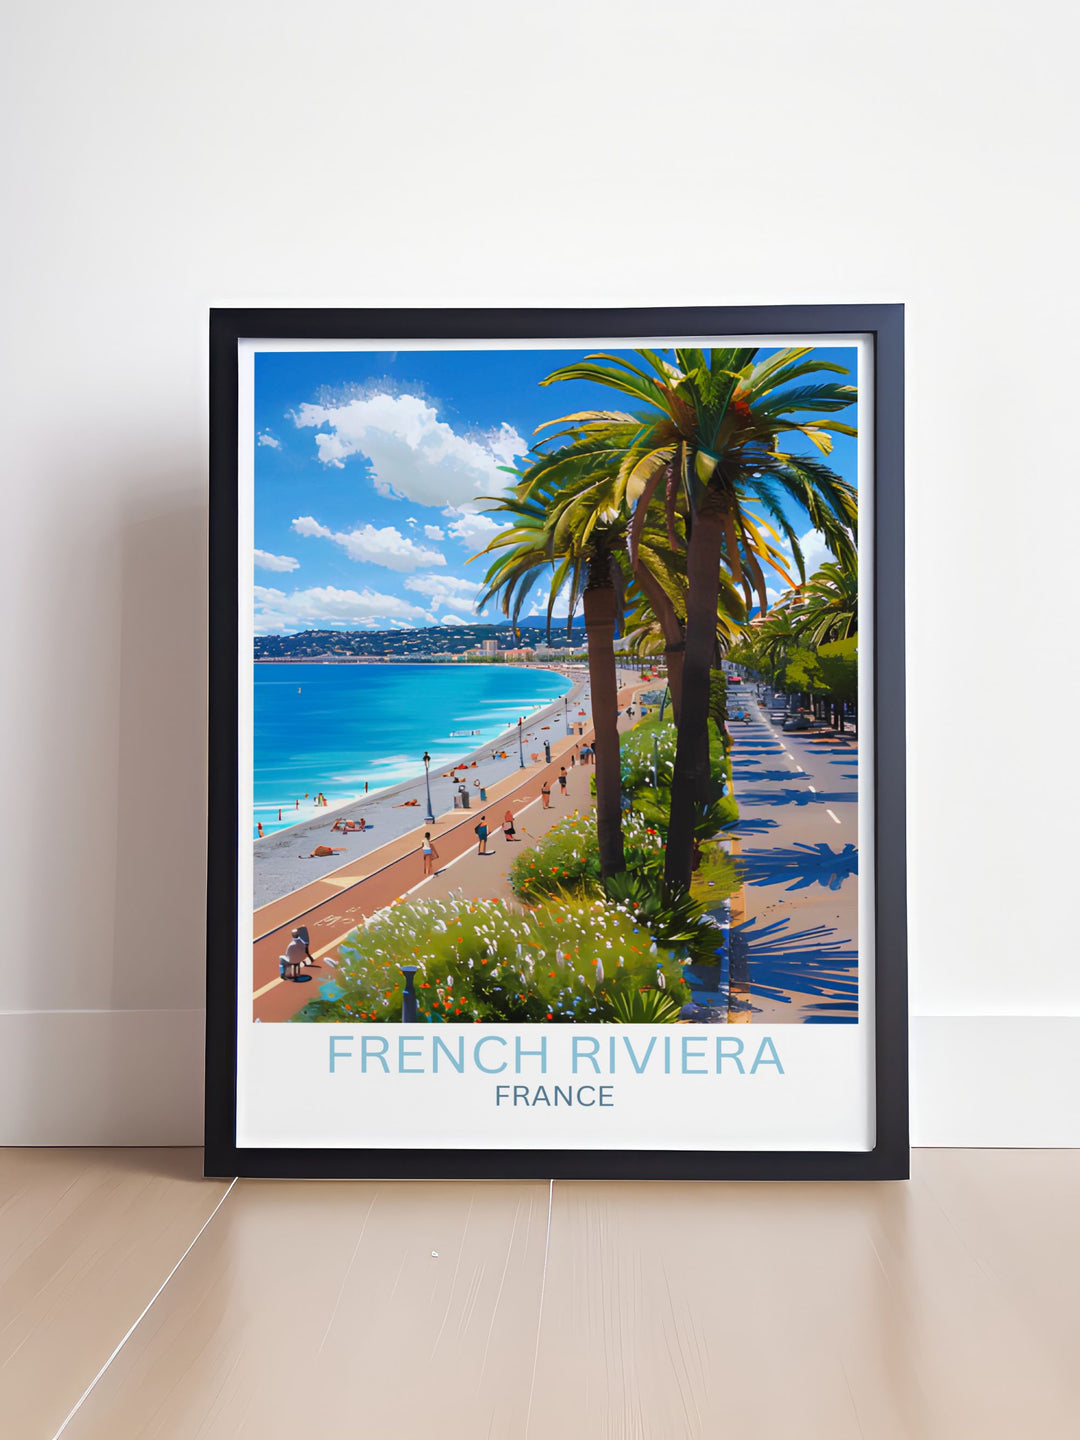 Vintage poster of the French Riviera featuring classic architecture along the sunny Promenade des Anglais, ideal for collectors